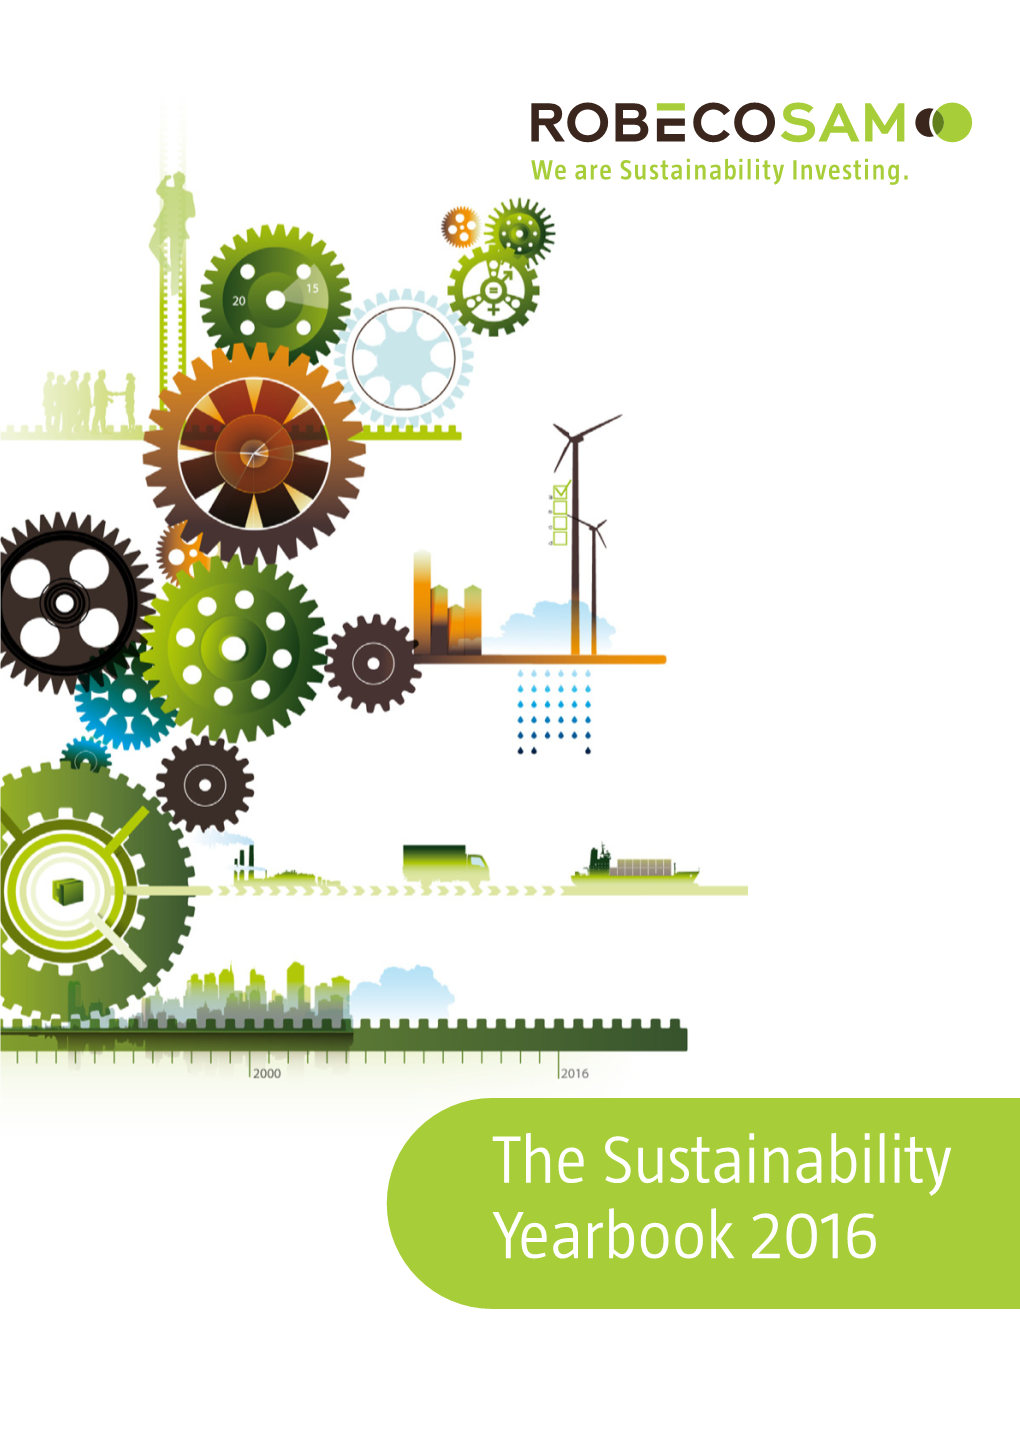 The Sustainability Yearbook 2016 the Sustainability Yearbook 2016